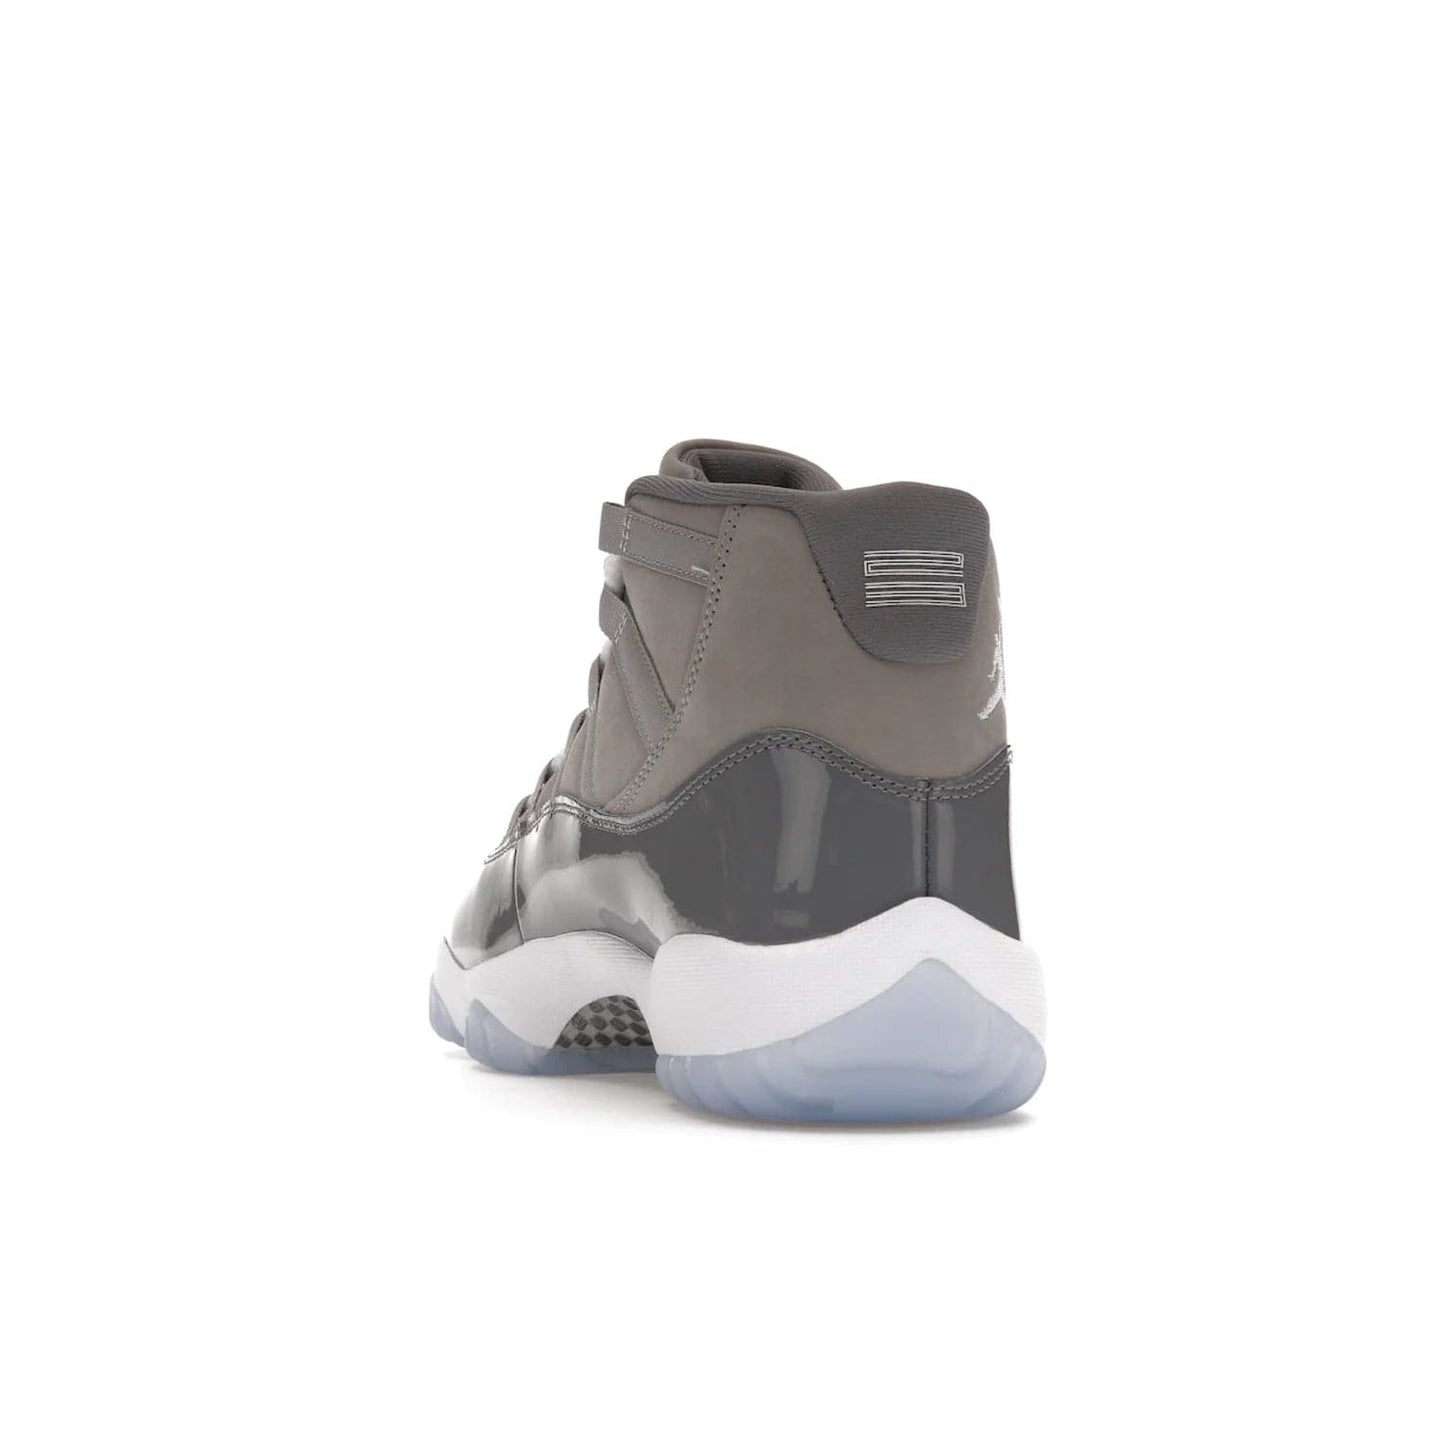 Jordan 11 Retro Cool Grey (2021) - Image 26 - Only at www.BallersClubKickz.com - Shop the Air Jordan 11 Retro Cool Grey (2021) for a must-have sneaker with a Cool Grey Durabuck upper, patent leather overlays, signature Jumpman embroidery, a white midsole, icy blue translucent outsole, and Multi-Color accents.  Released in December 2021 for $225.